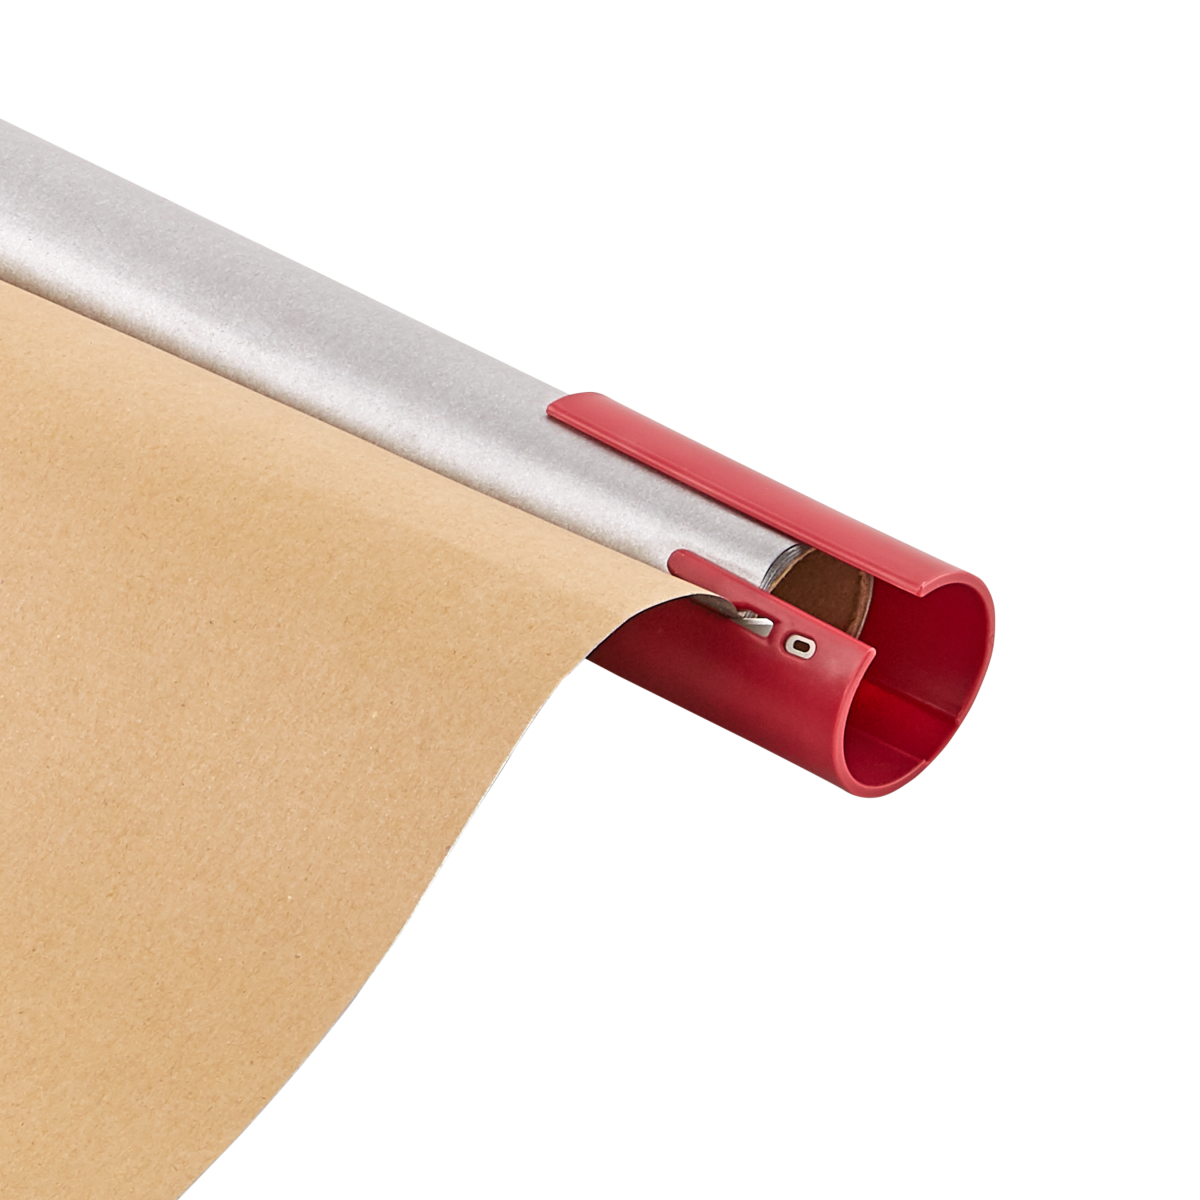 The Little Elf Gift Wrap Cutter Is Here to Make Holiday Wrapping Easy